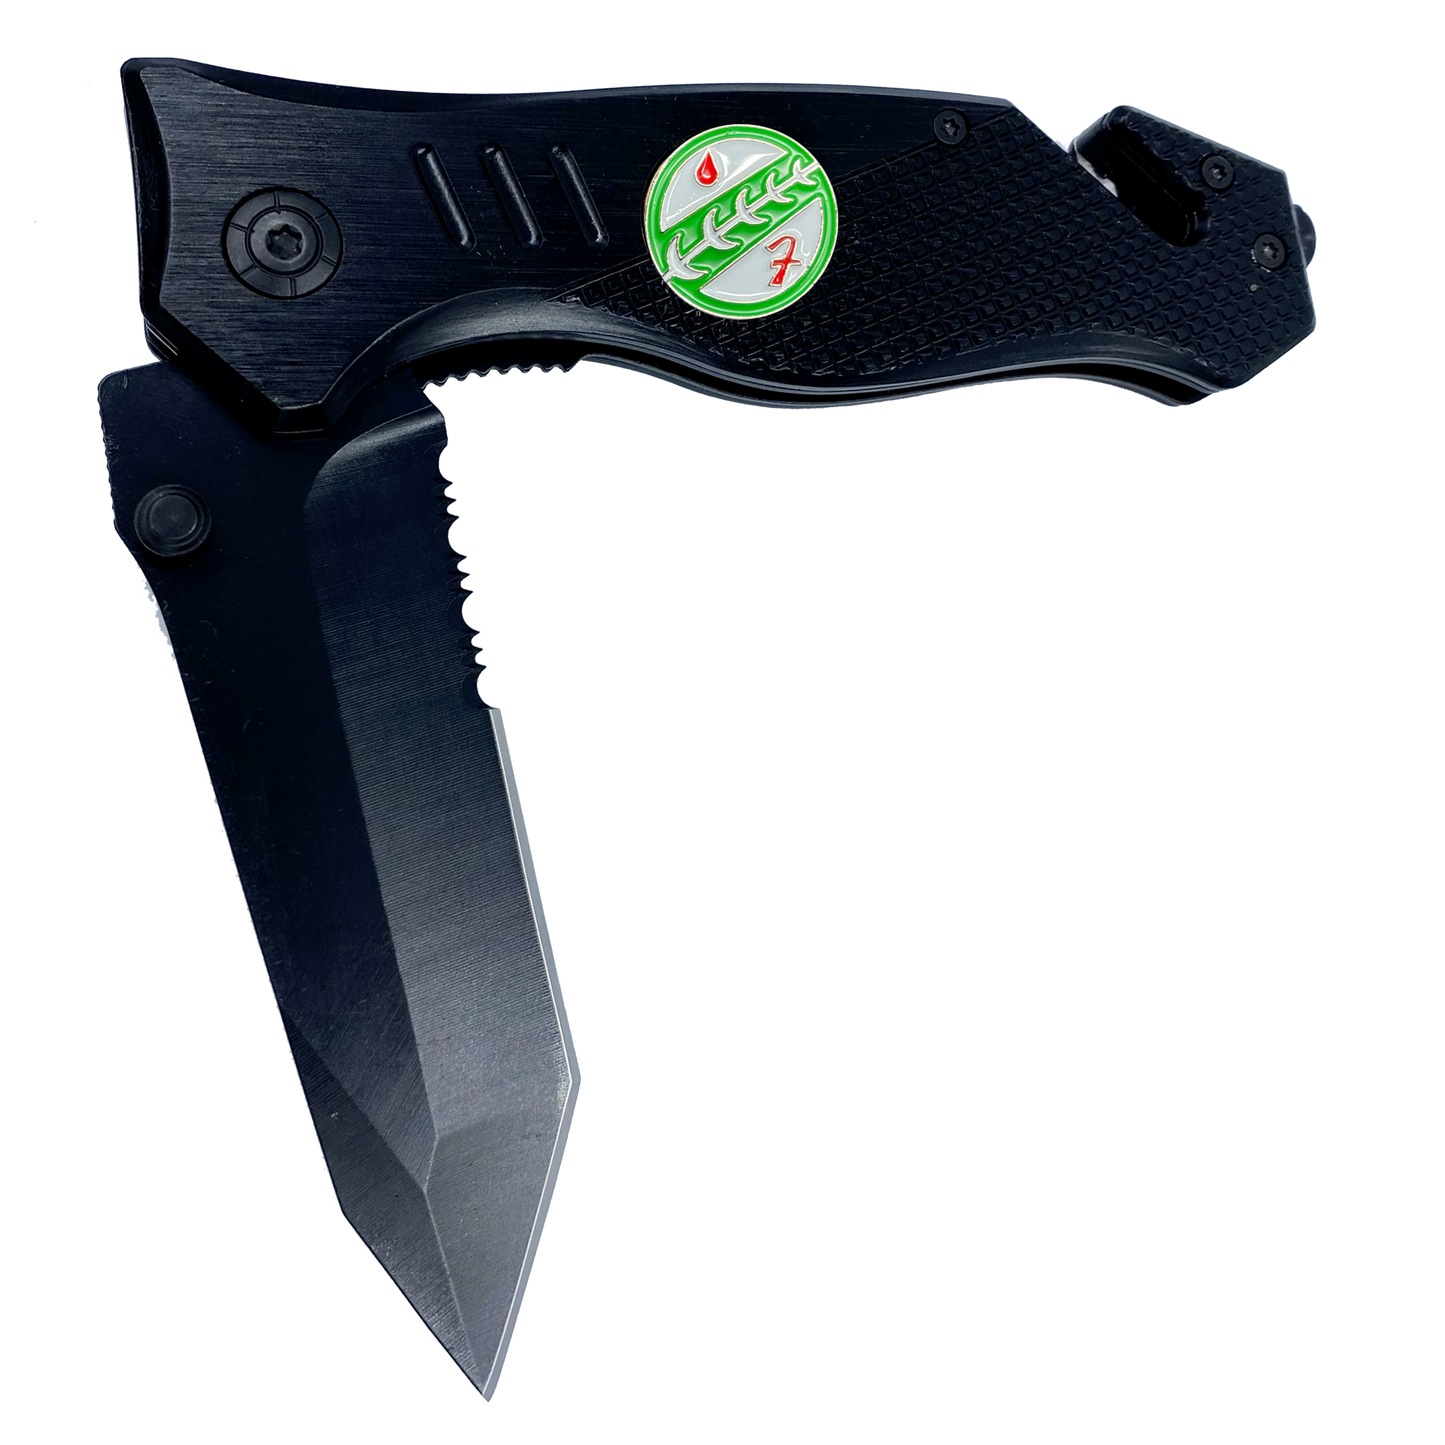 Bounty Hunter 3-in-1 Police Tactical Rescue knife tool with Seatbelt Cutter, Steel Serrated Blade, Glass Breaker Patrol Agent CBP